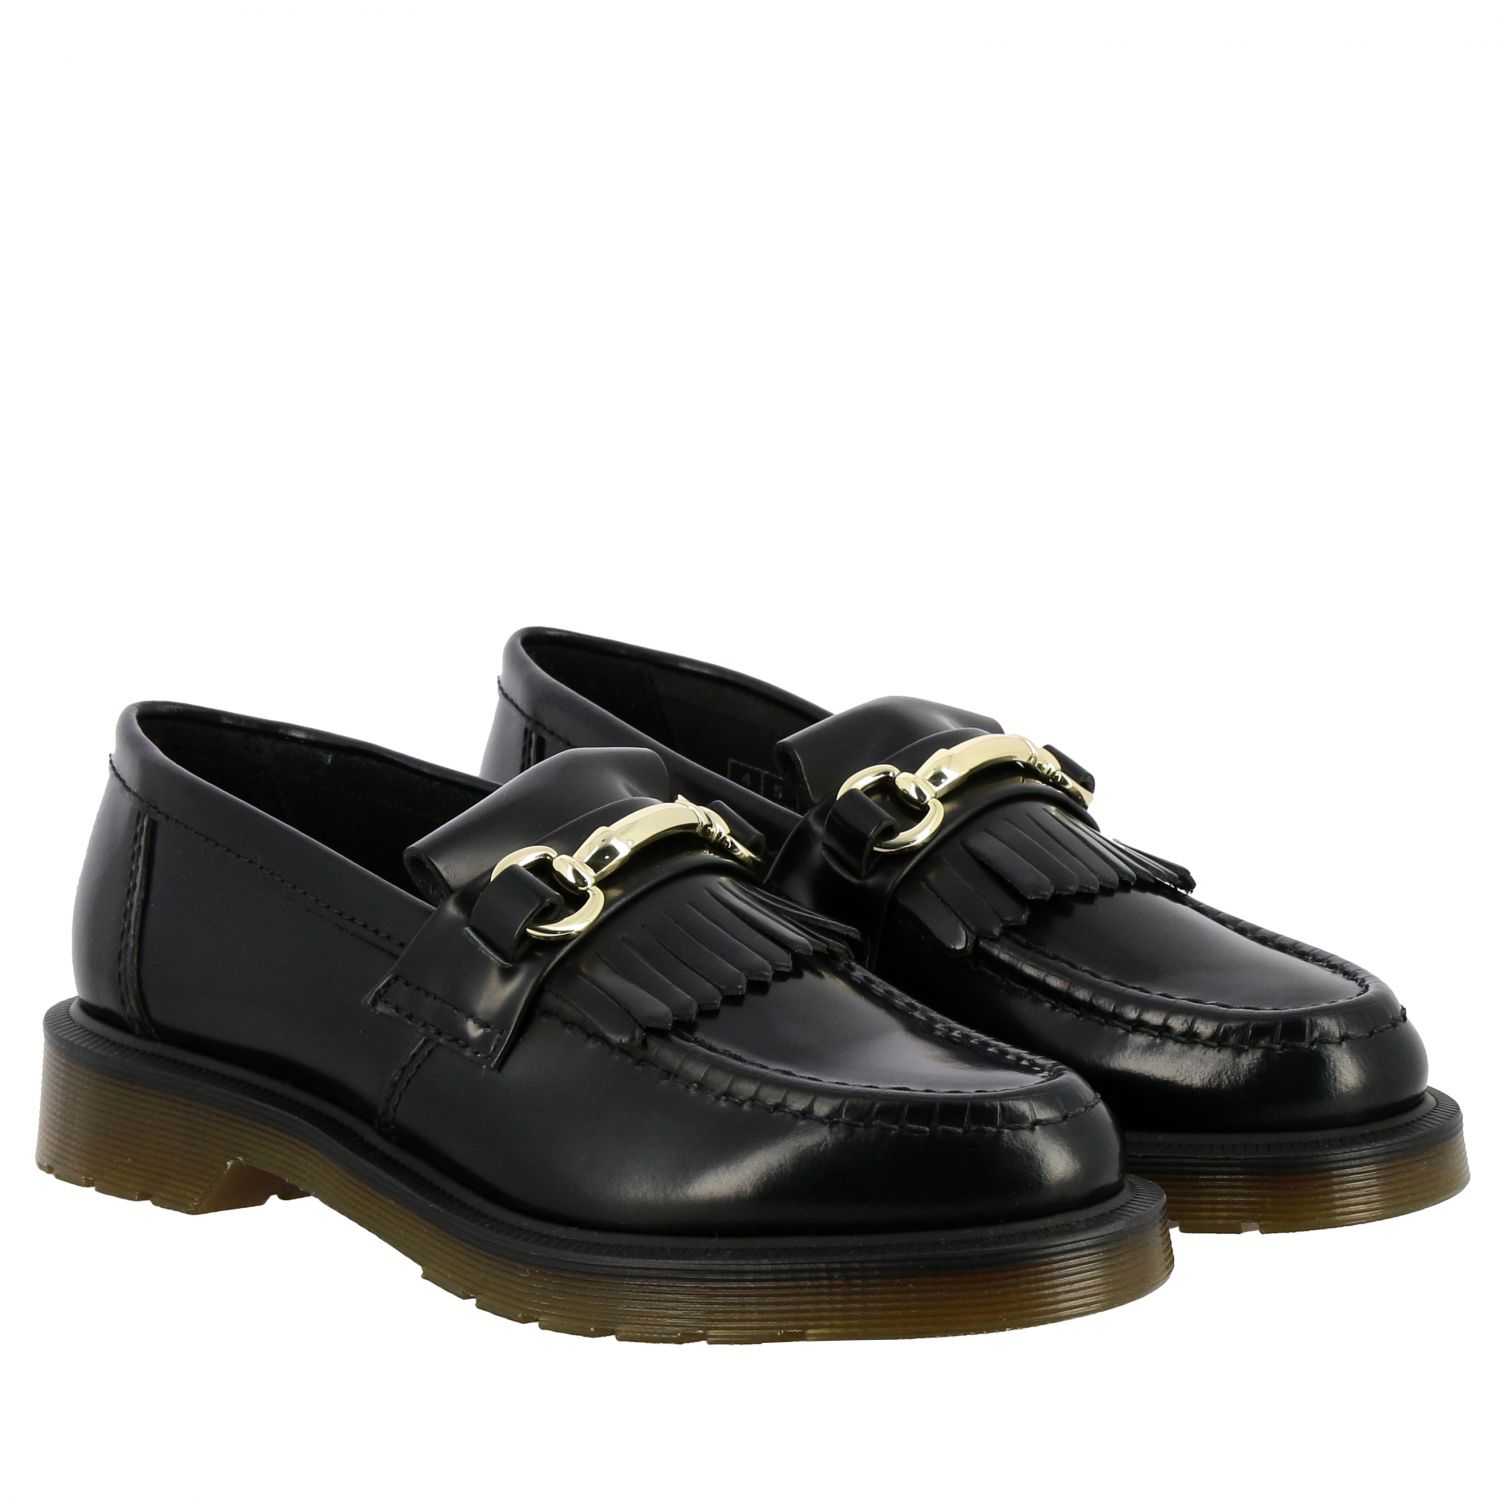 Dr. Martens Outlet: Loafers women | Loafers Dr. Women Loafers Dr. Martens DMSADRSBKPS25024 GIGLIO.COM